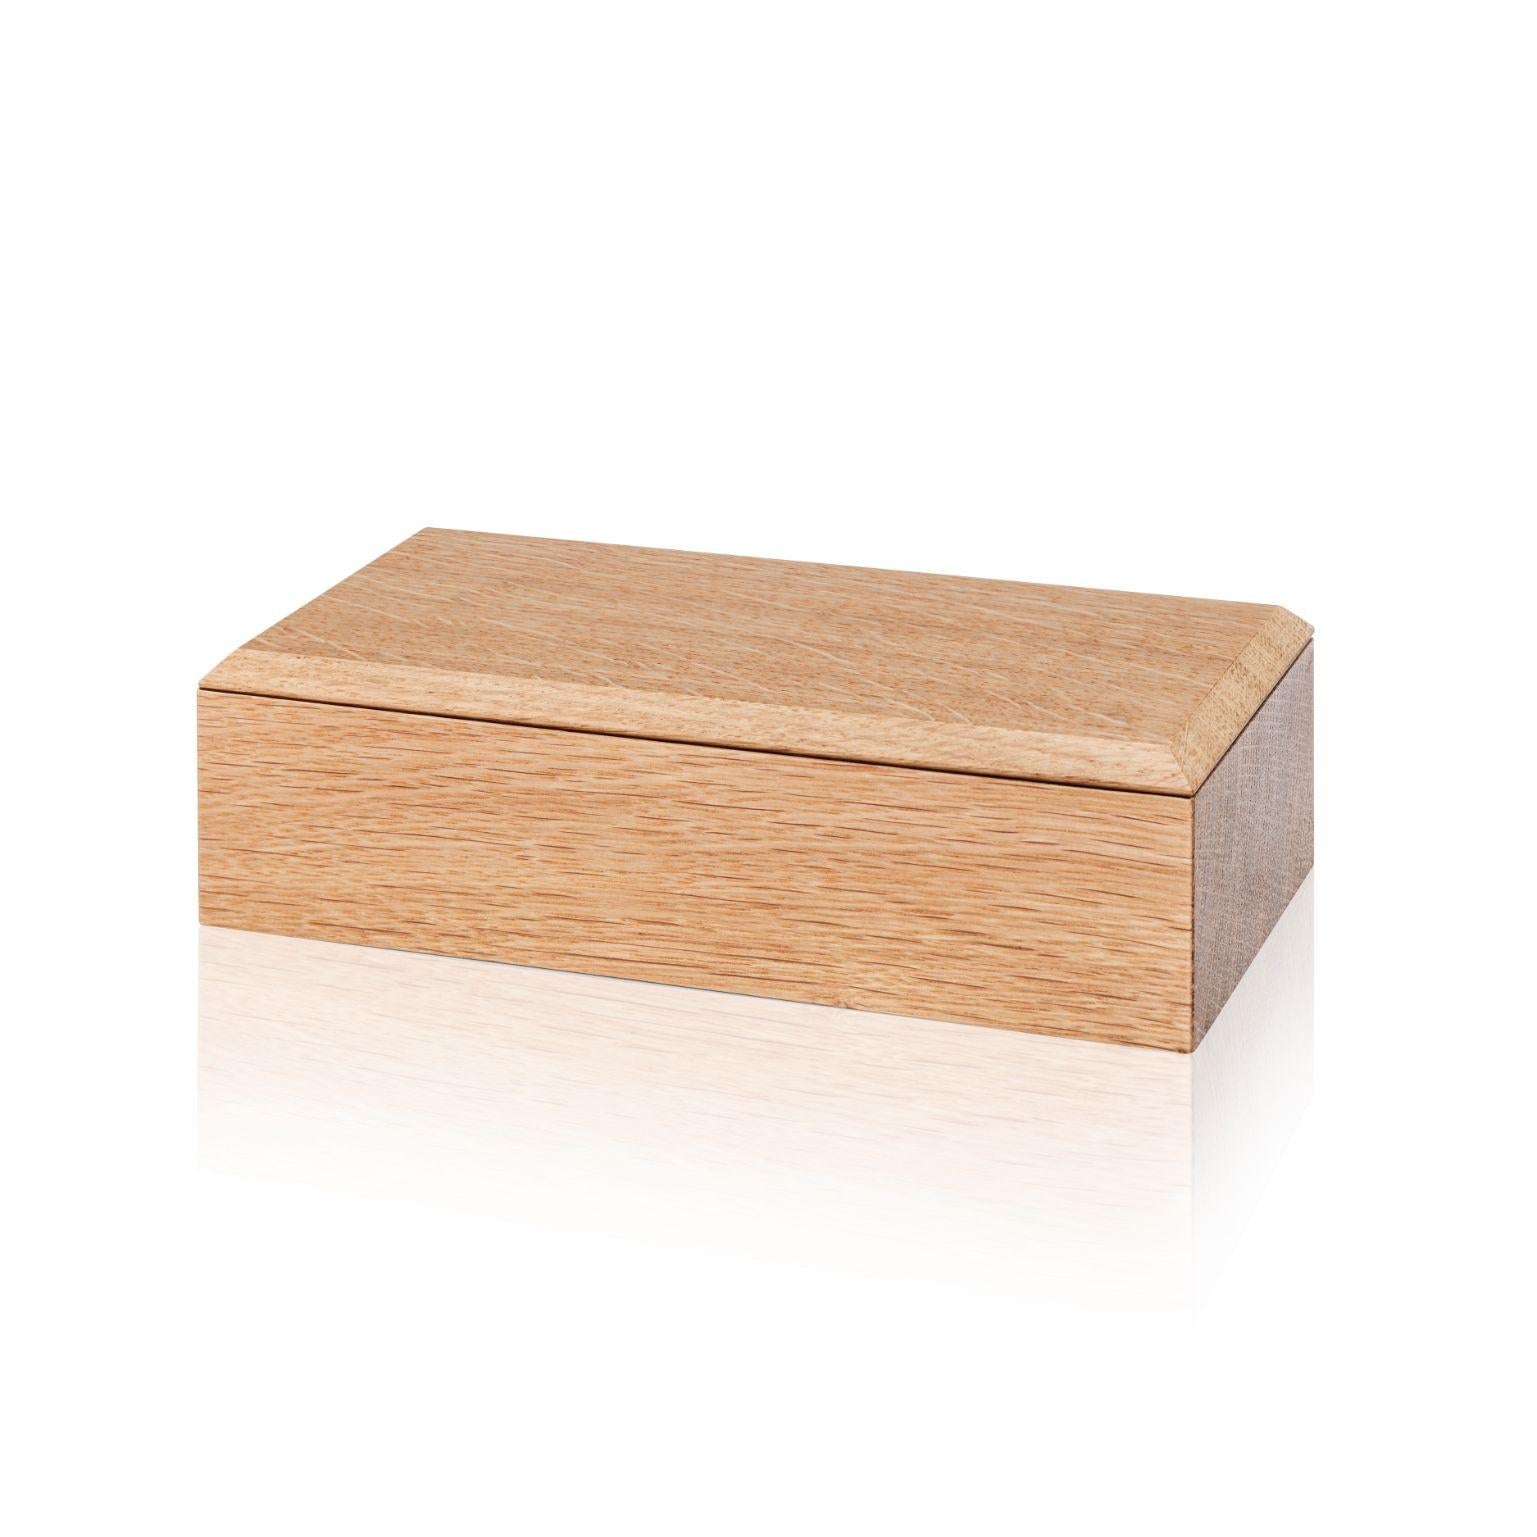 Pino Boxes - Pen by Antrei Hartikainen
Materials: Oak, Natural Oil Wax
Dimensions: W 18 / 14, D 9, H 5 / 7cm

A set of three vertical and two horizontal stacking boxes constructed of vividly grained woods. The pino boxes may be arranged in